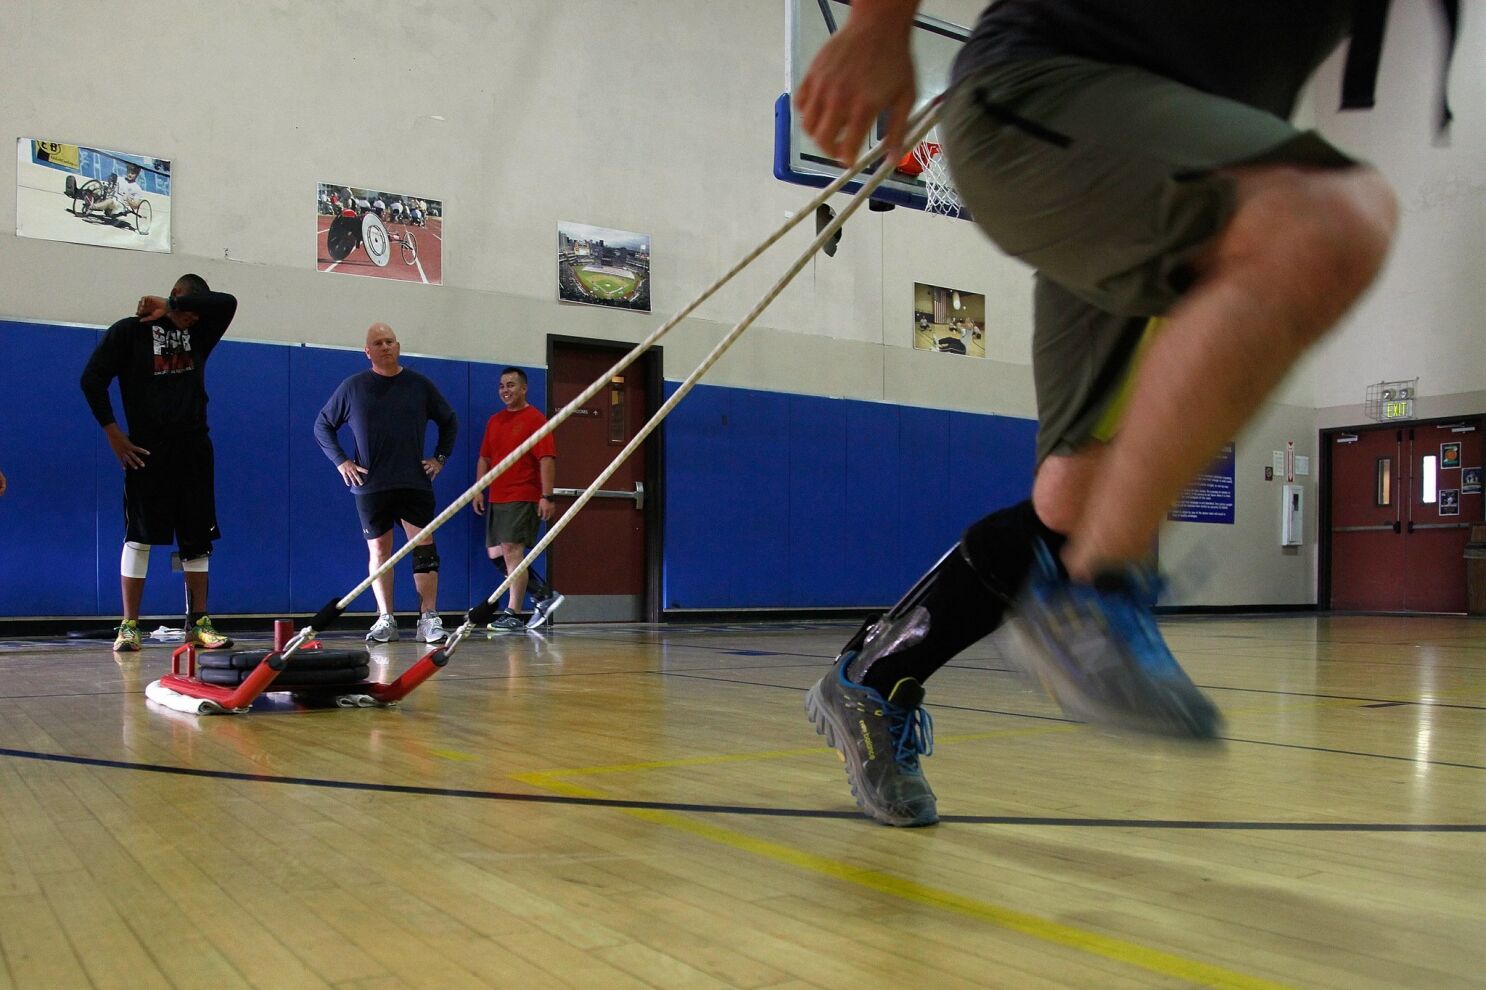 Orthotic Brace Takes Soldiers From Limping To Leaping : Shots - Health News  : NPR